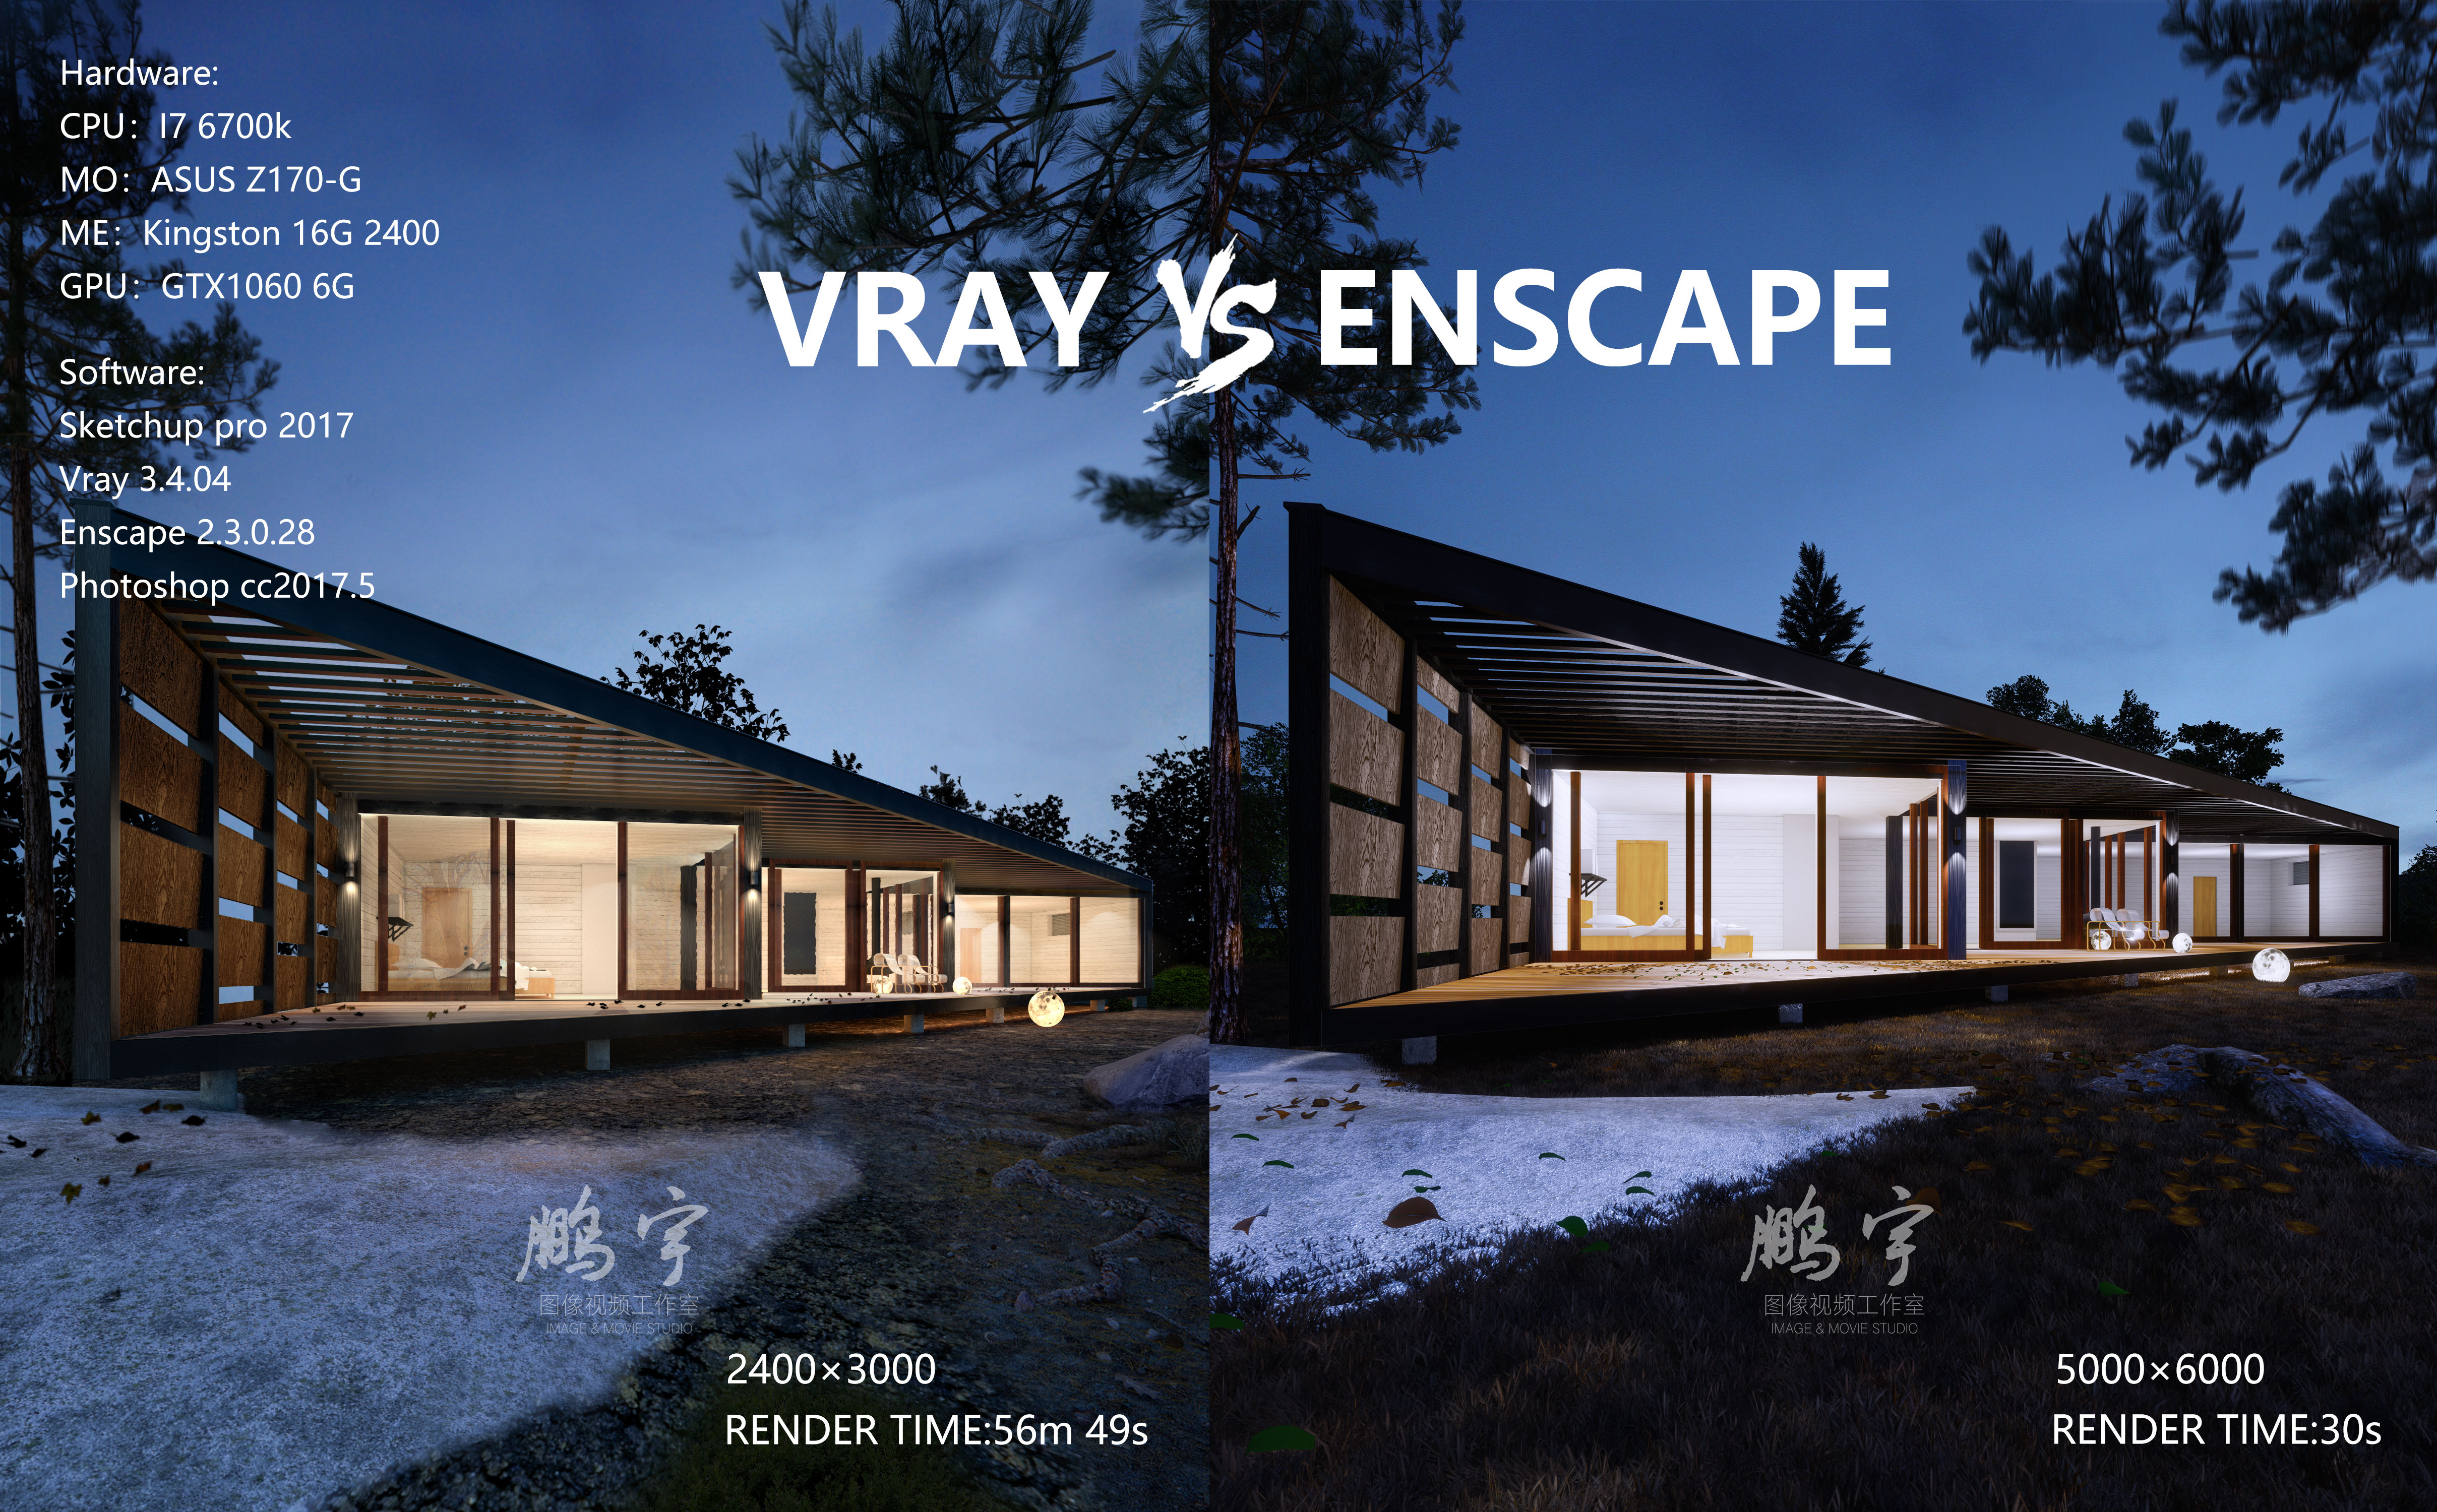 which is better enscape or vray